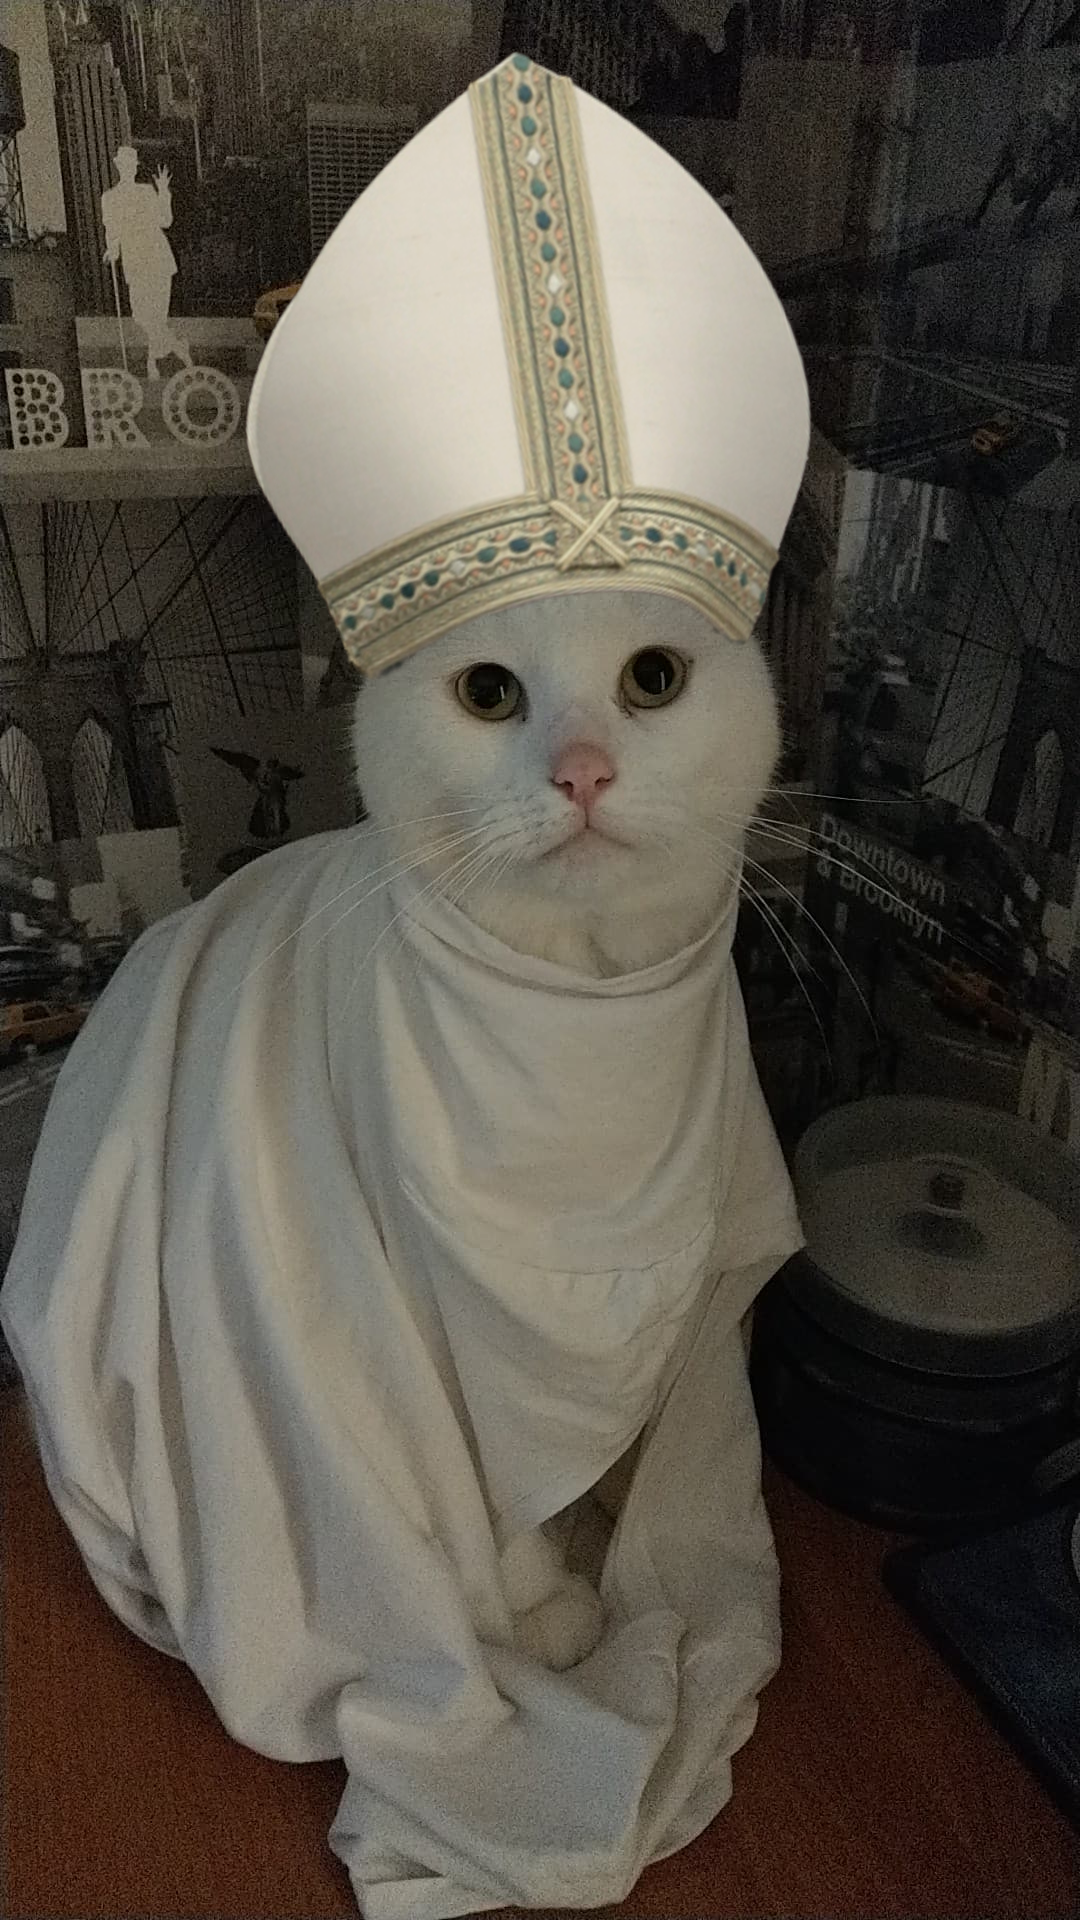 tea(r) — well my cat became a pope